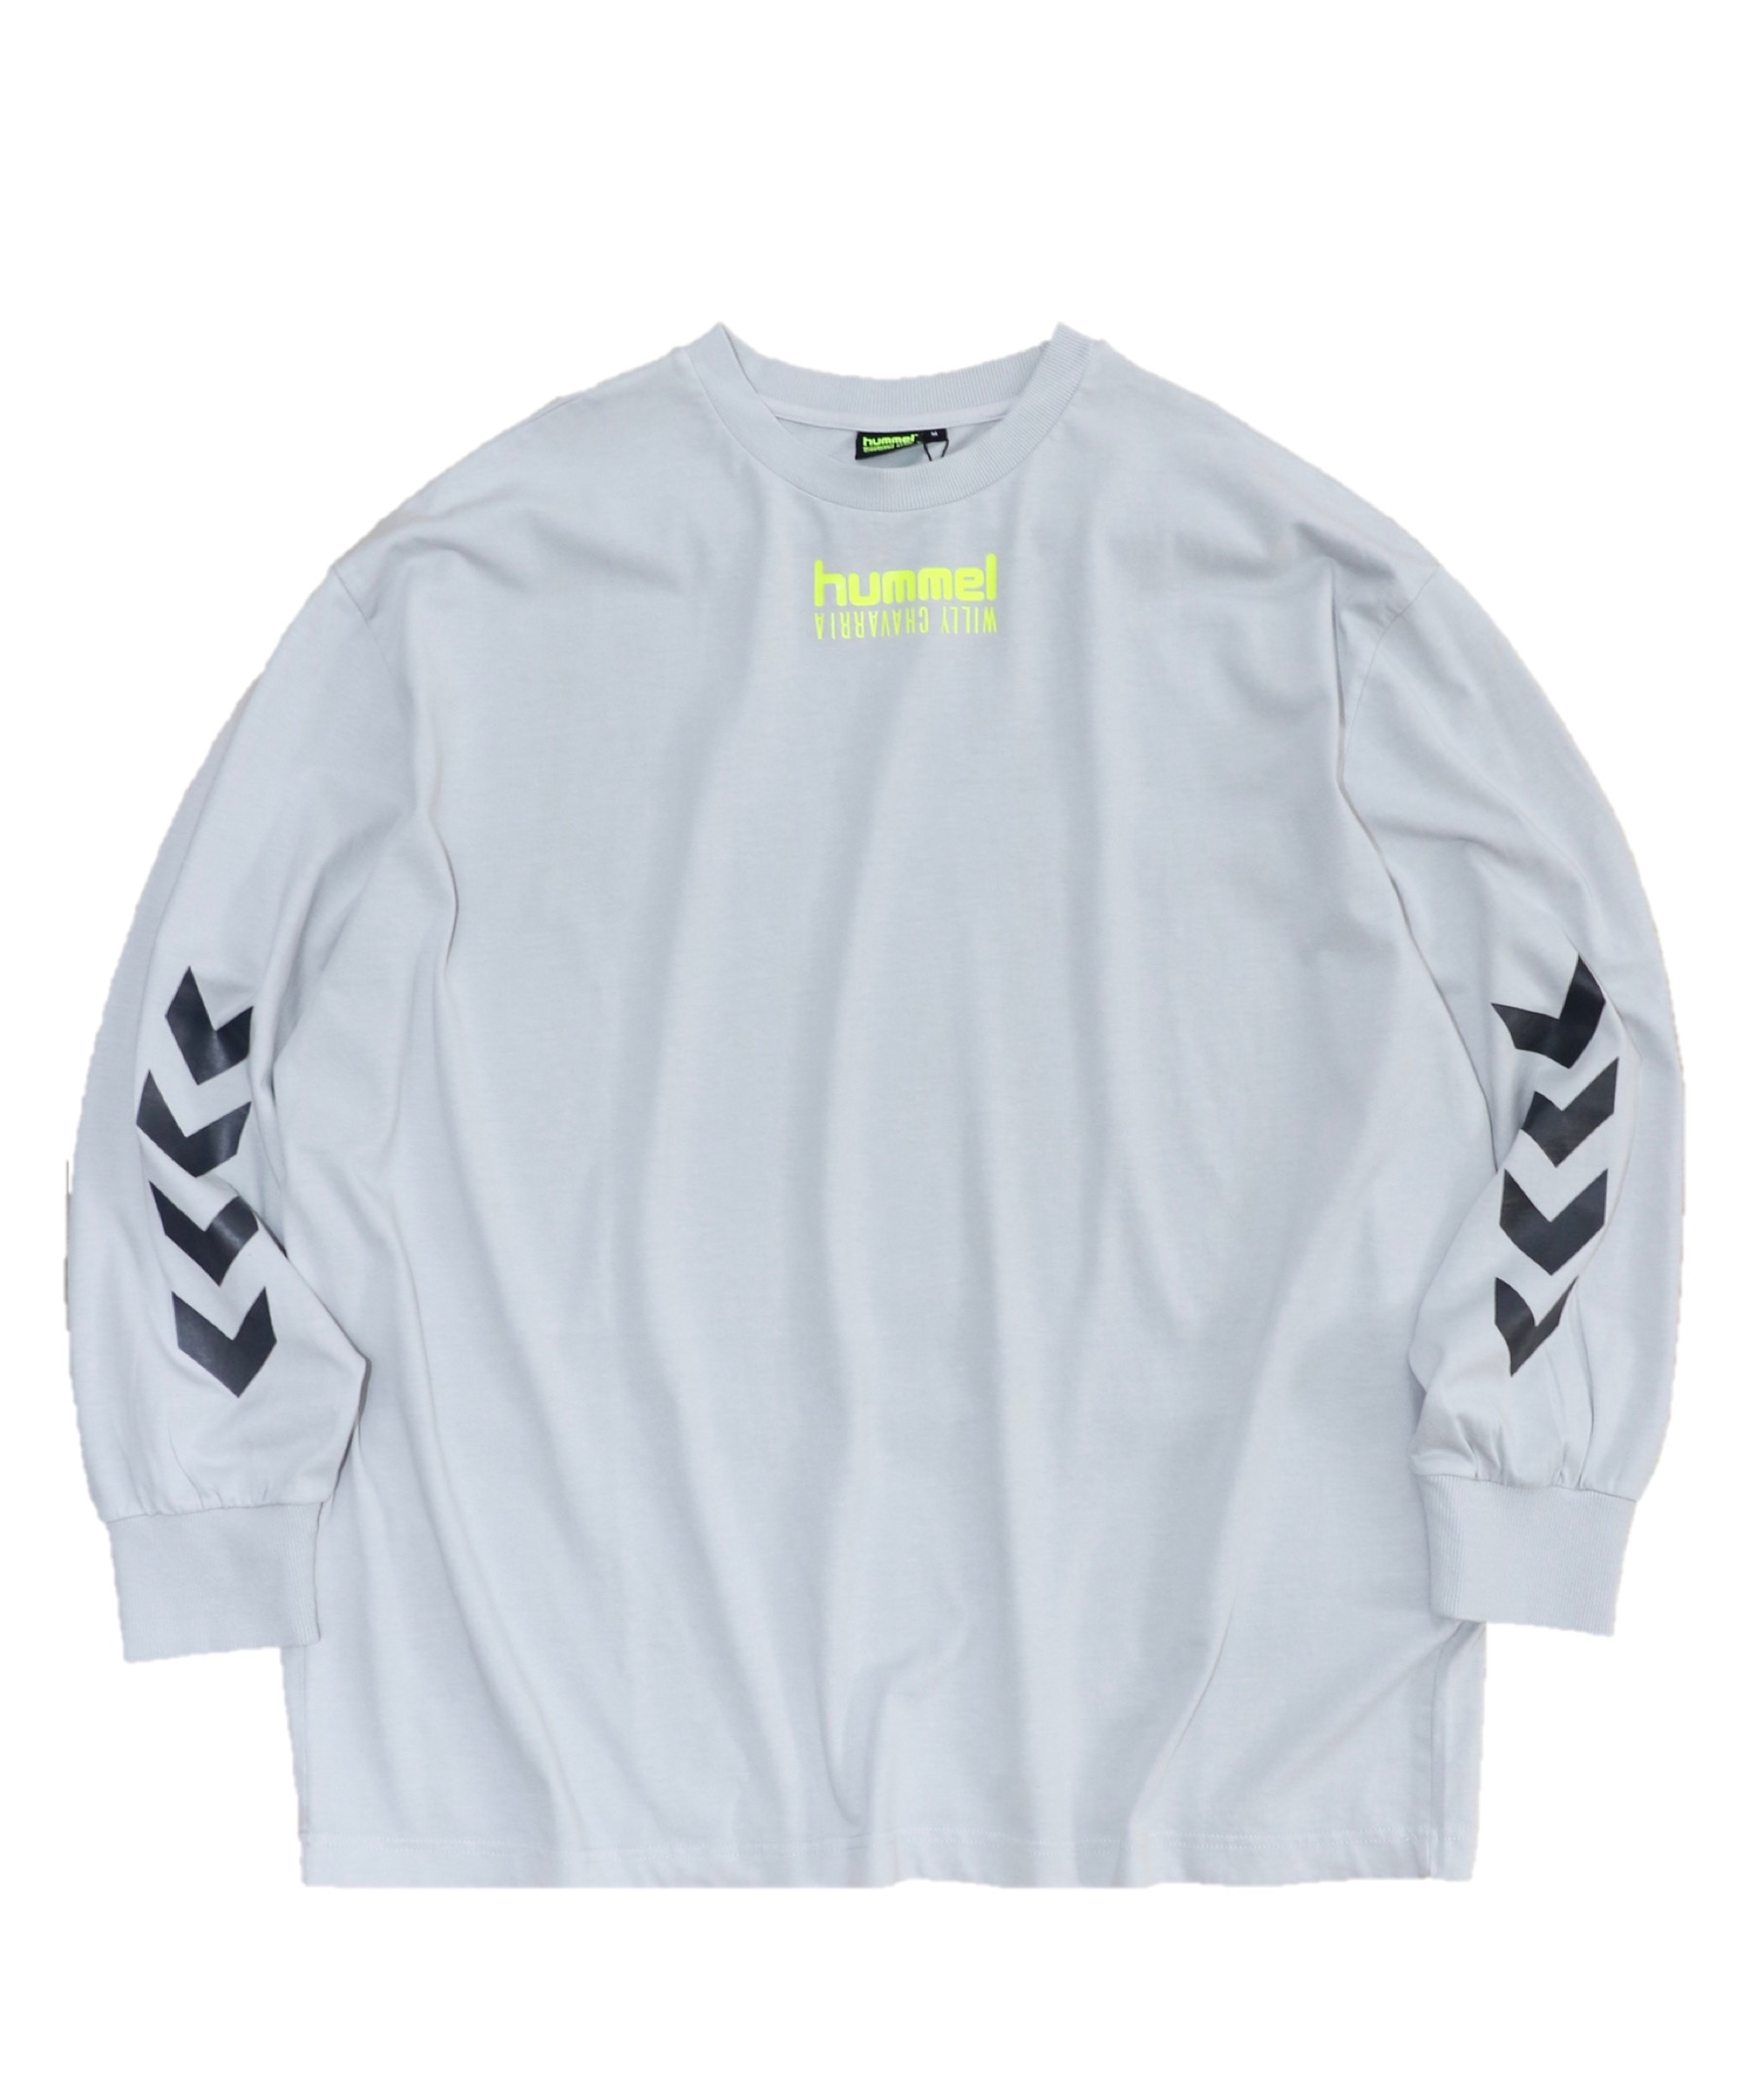 WILLY CHAVARRIA×hummel / WILLY BUFFALO T-SHIRT L/S. – C.E.L.STORE NOTE